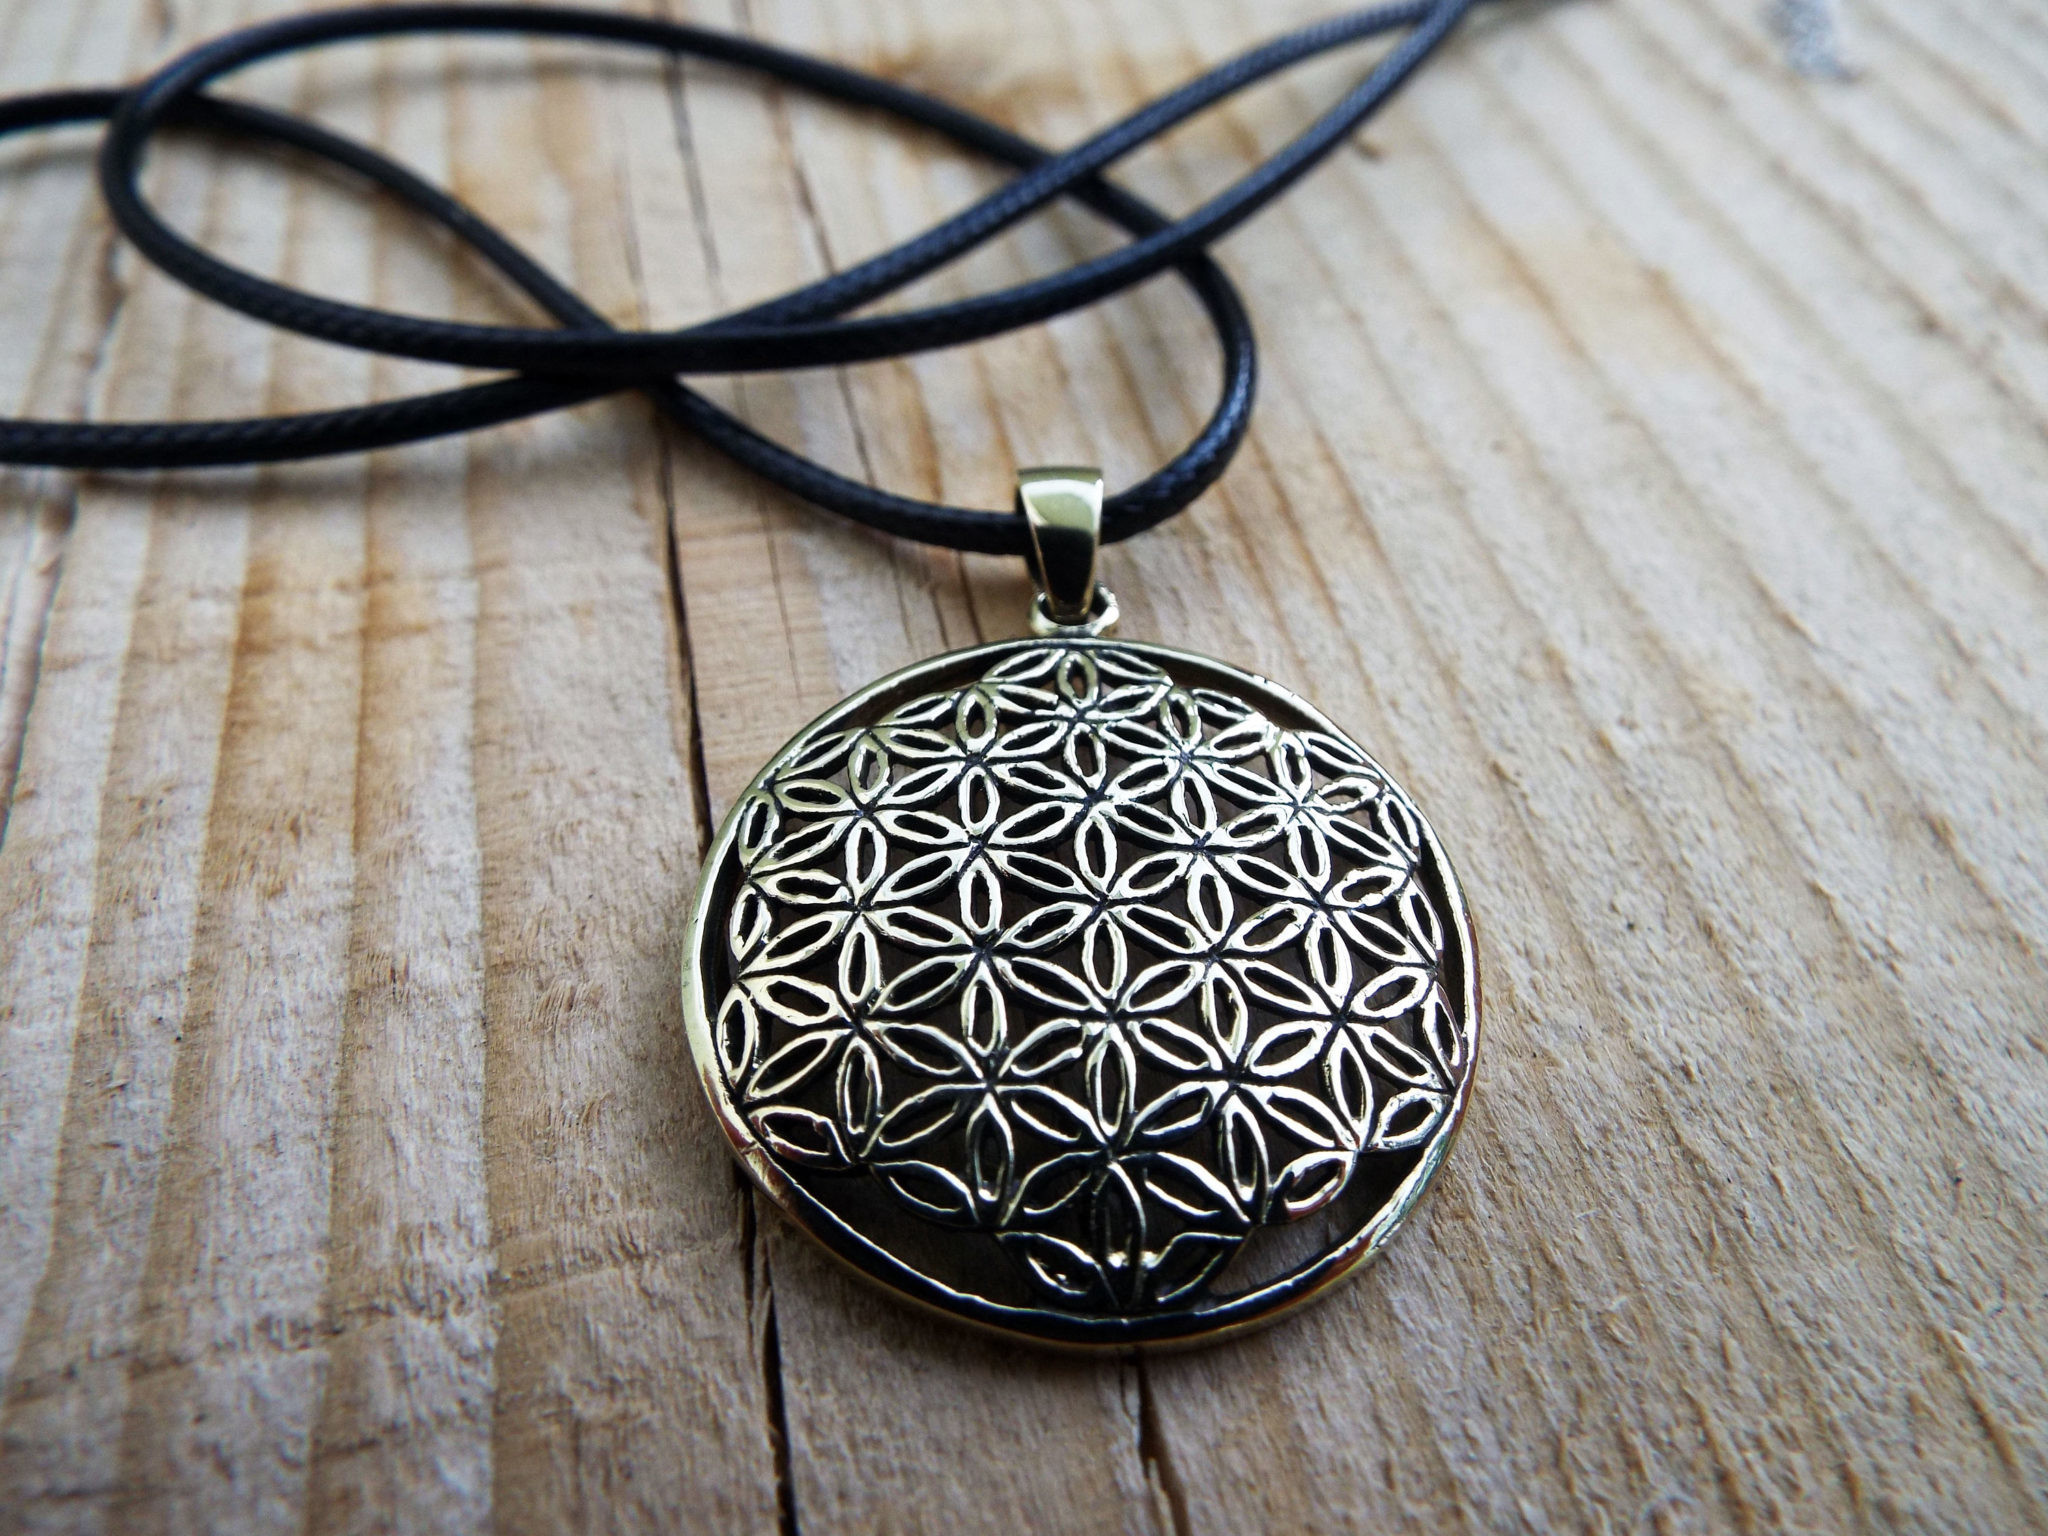 2048x1536 Flower of Life Seed of Life Pendant Handmade Protection Bronze Ancient  Symbol Necklace Jewelry Floral Boho